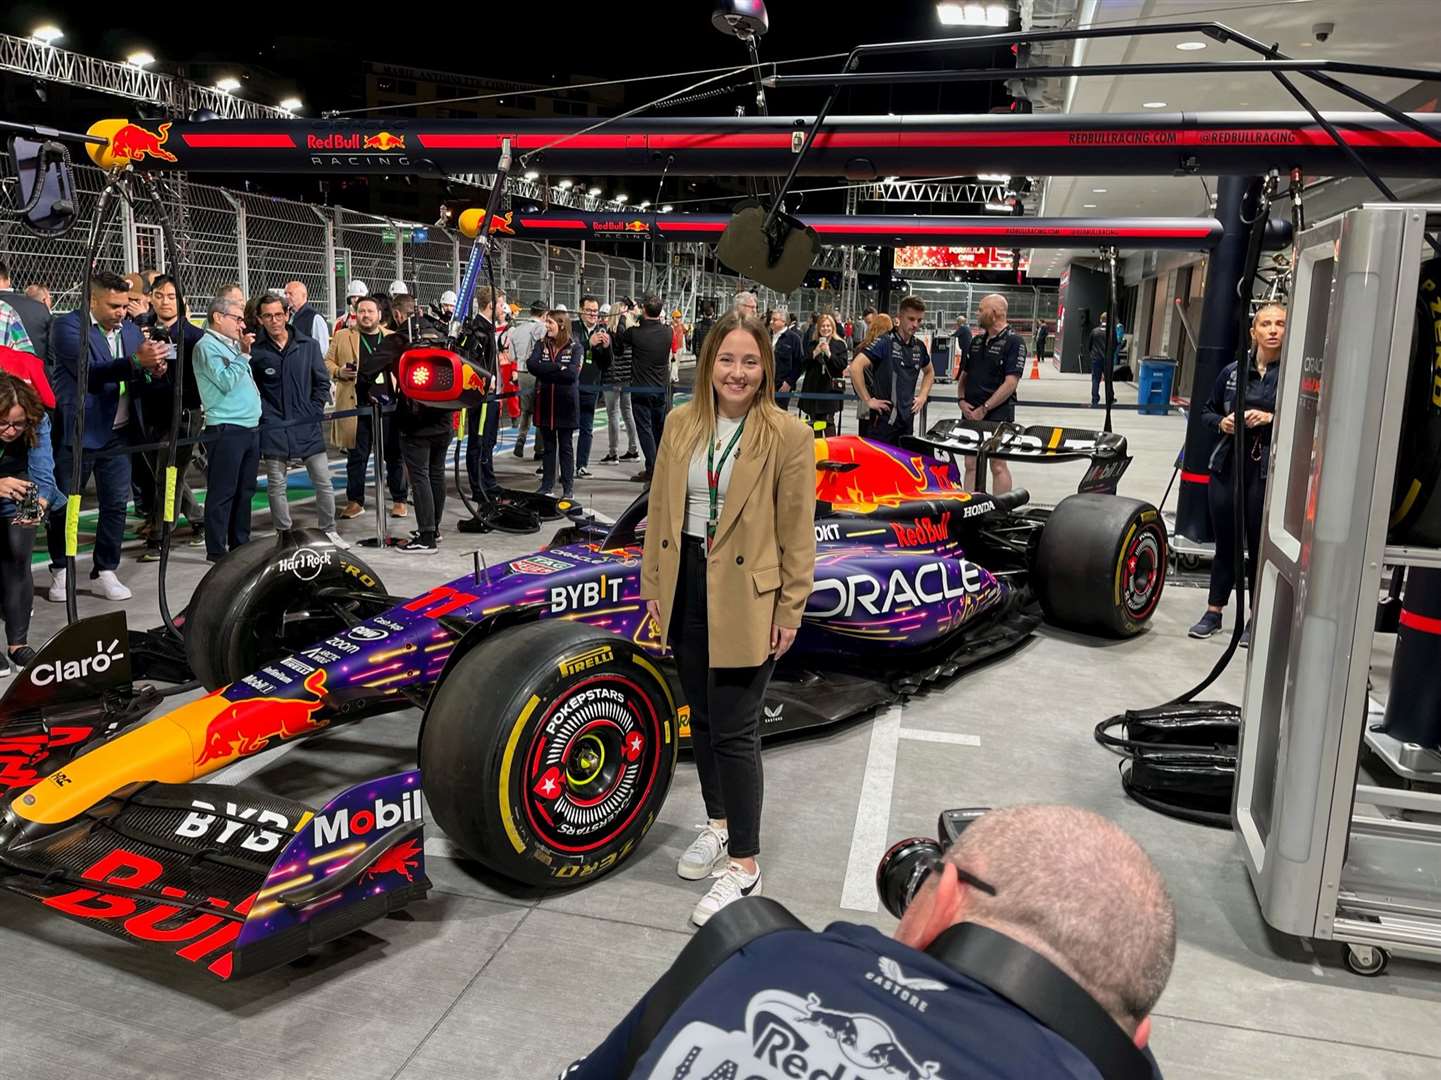 Lindsay Palmer won a competition to create a design for a Formula One car for the Las Vegas Grand Prix last month. Picture: Lindsay Palmer